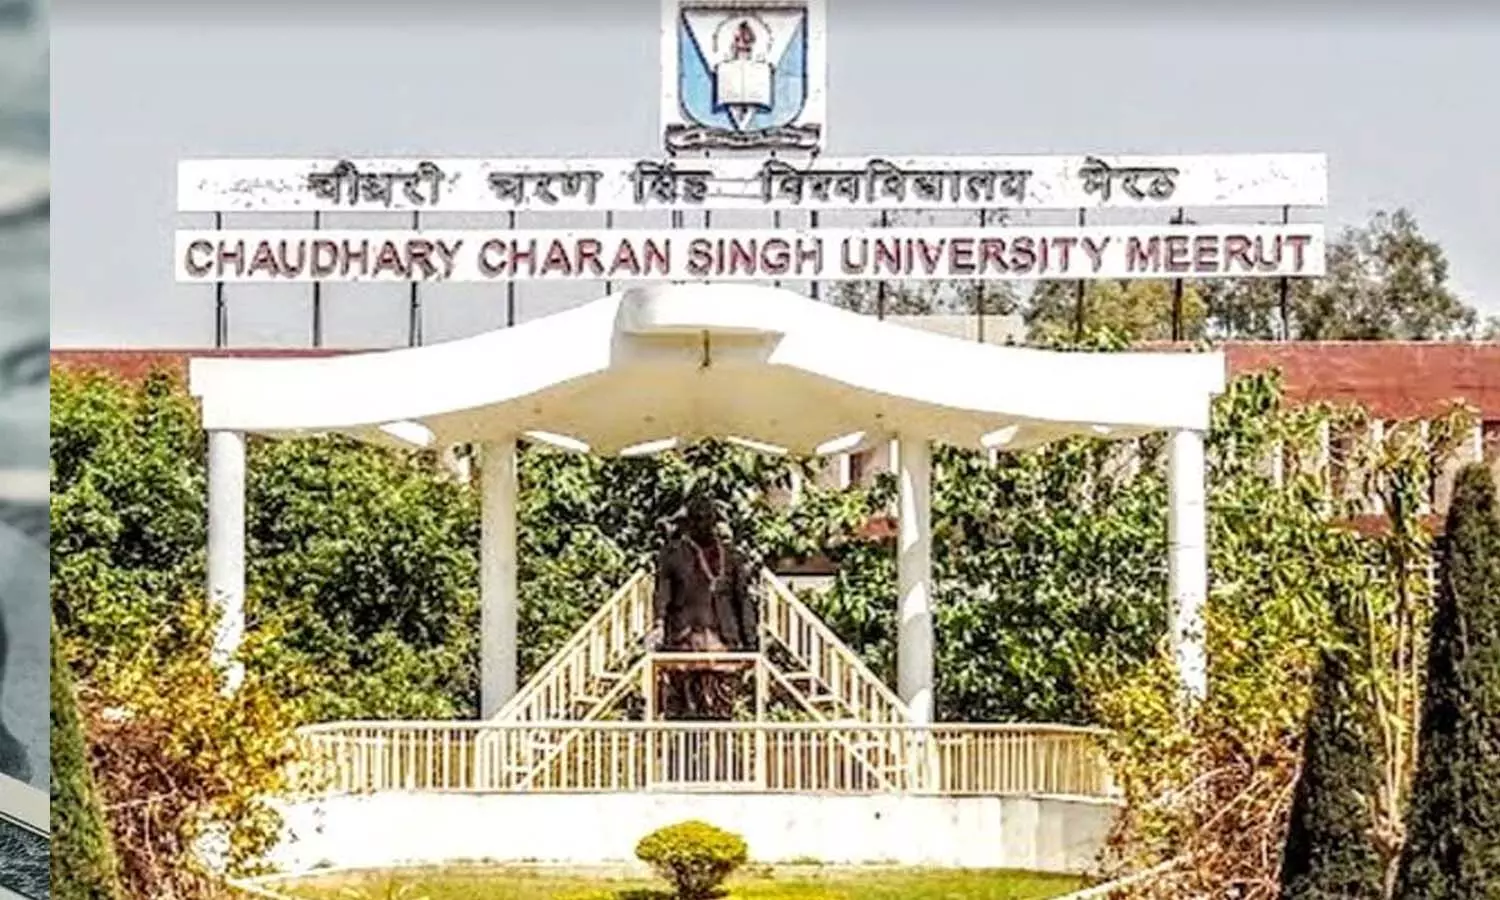 BEd examinations of Chaudhary Charan Singh University of Meerut postponed till further orders